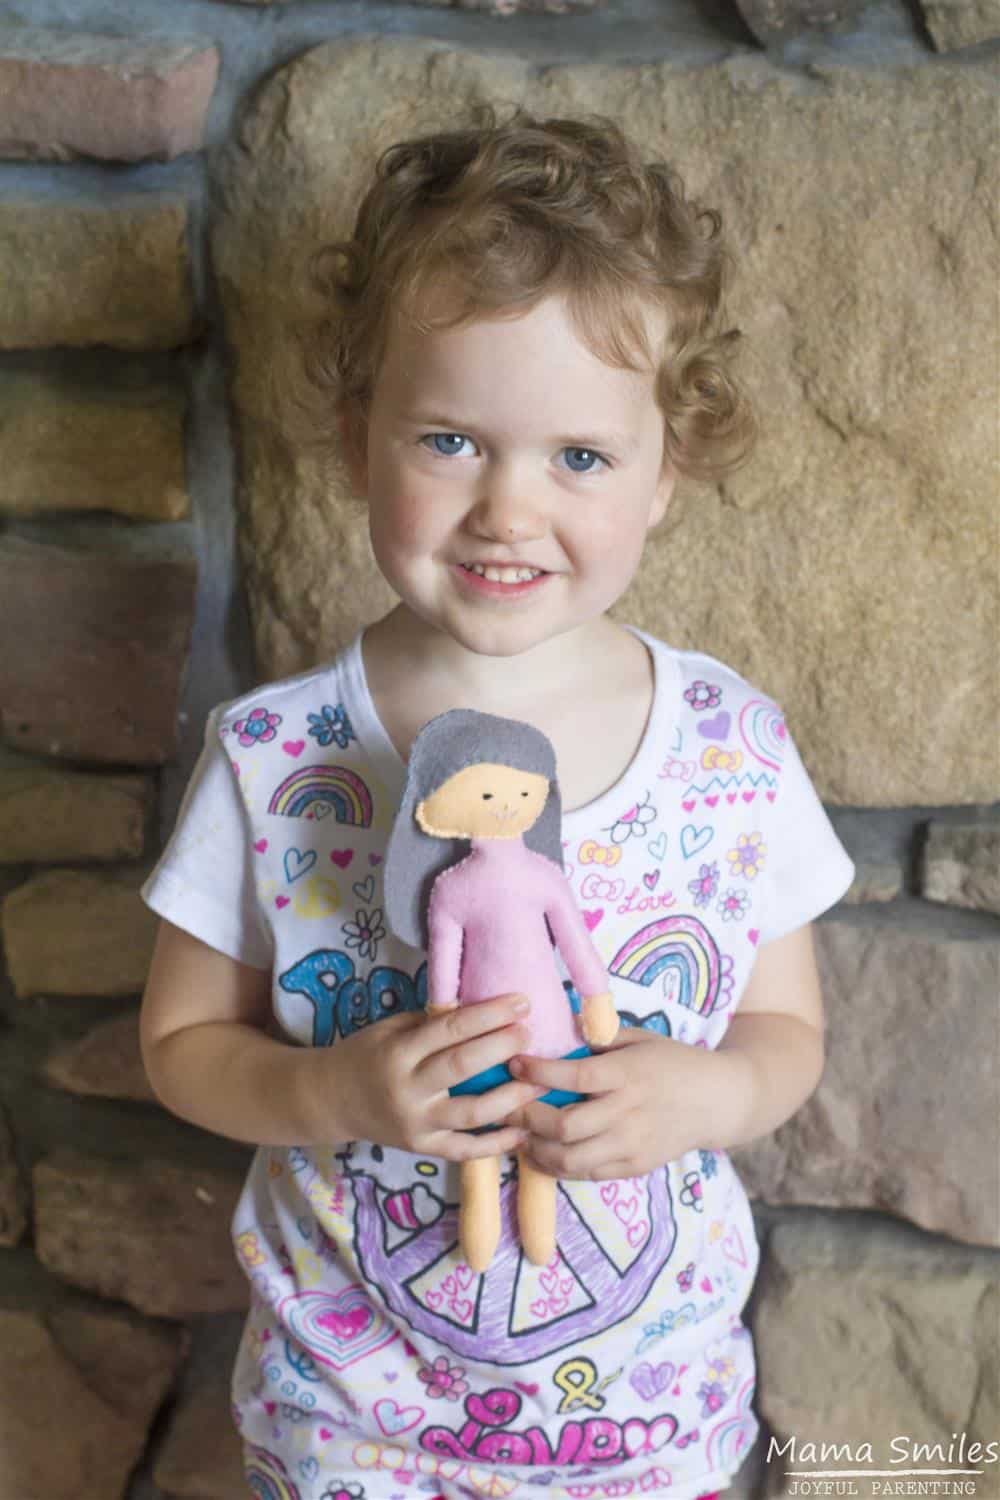 Oh, the magic of bringing a child's imagination to life! This felt doll was based off of her drawing. Fantastic!